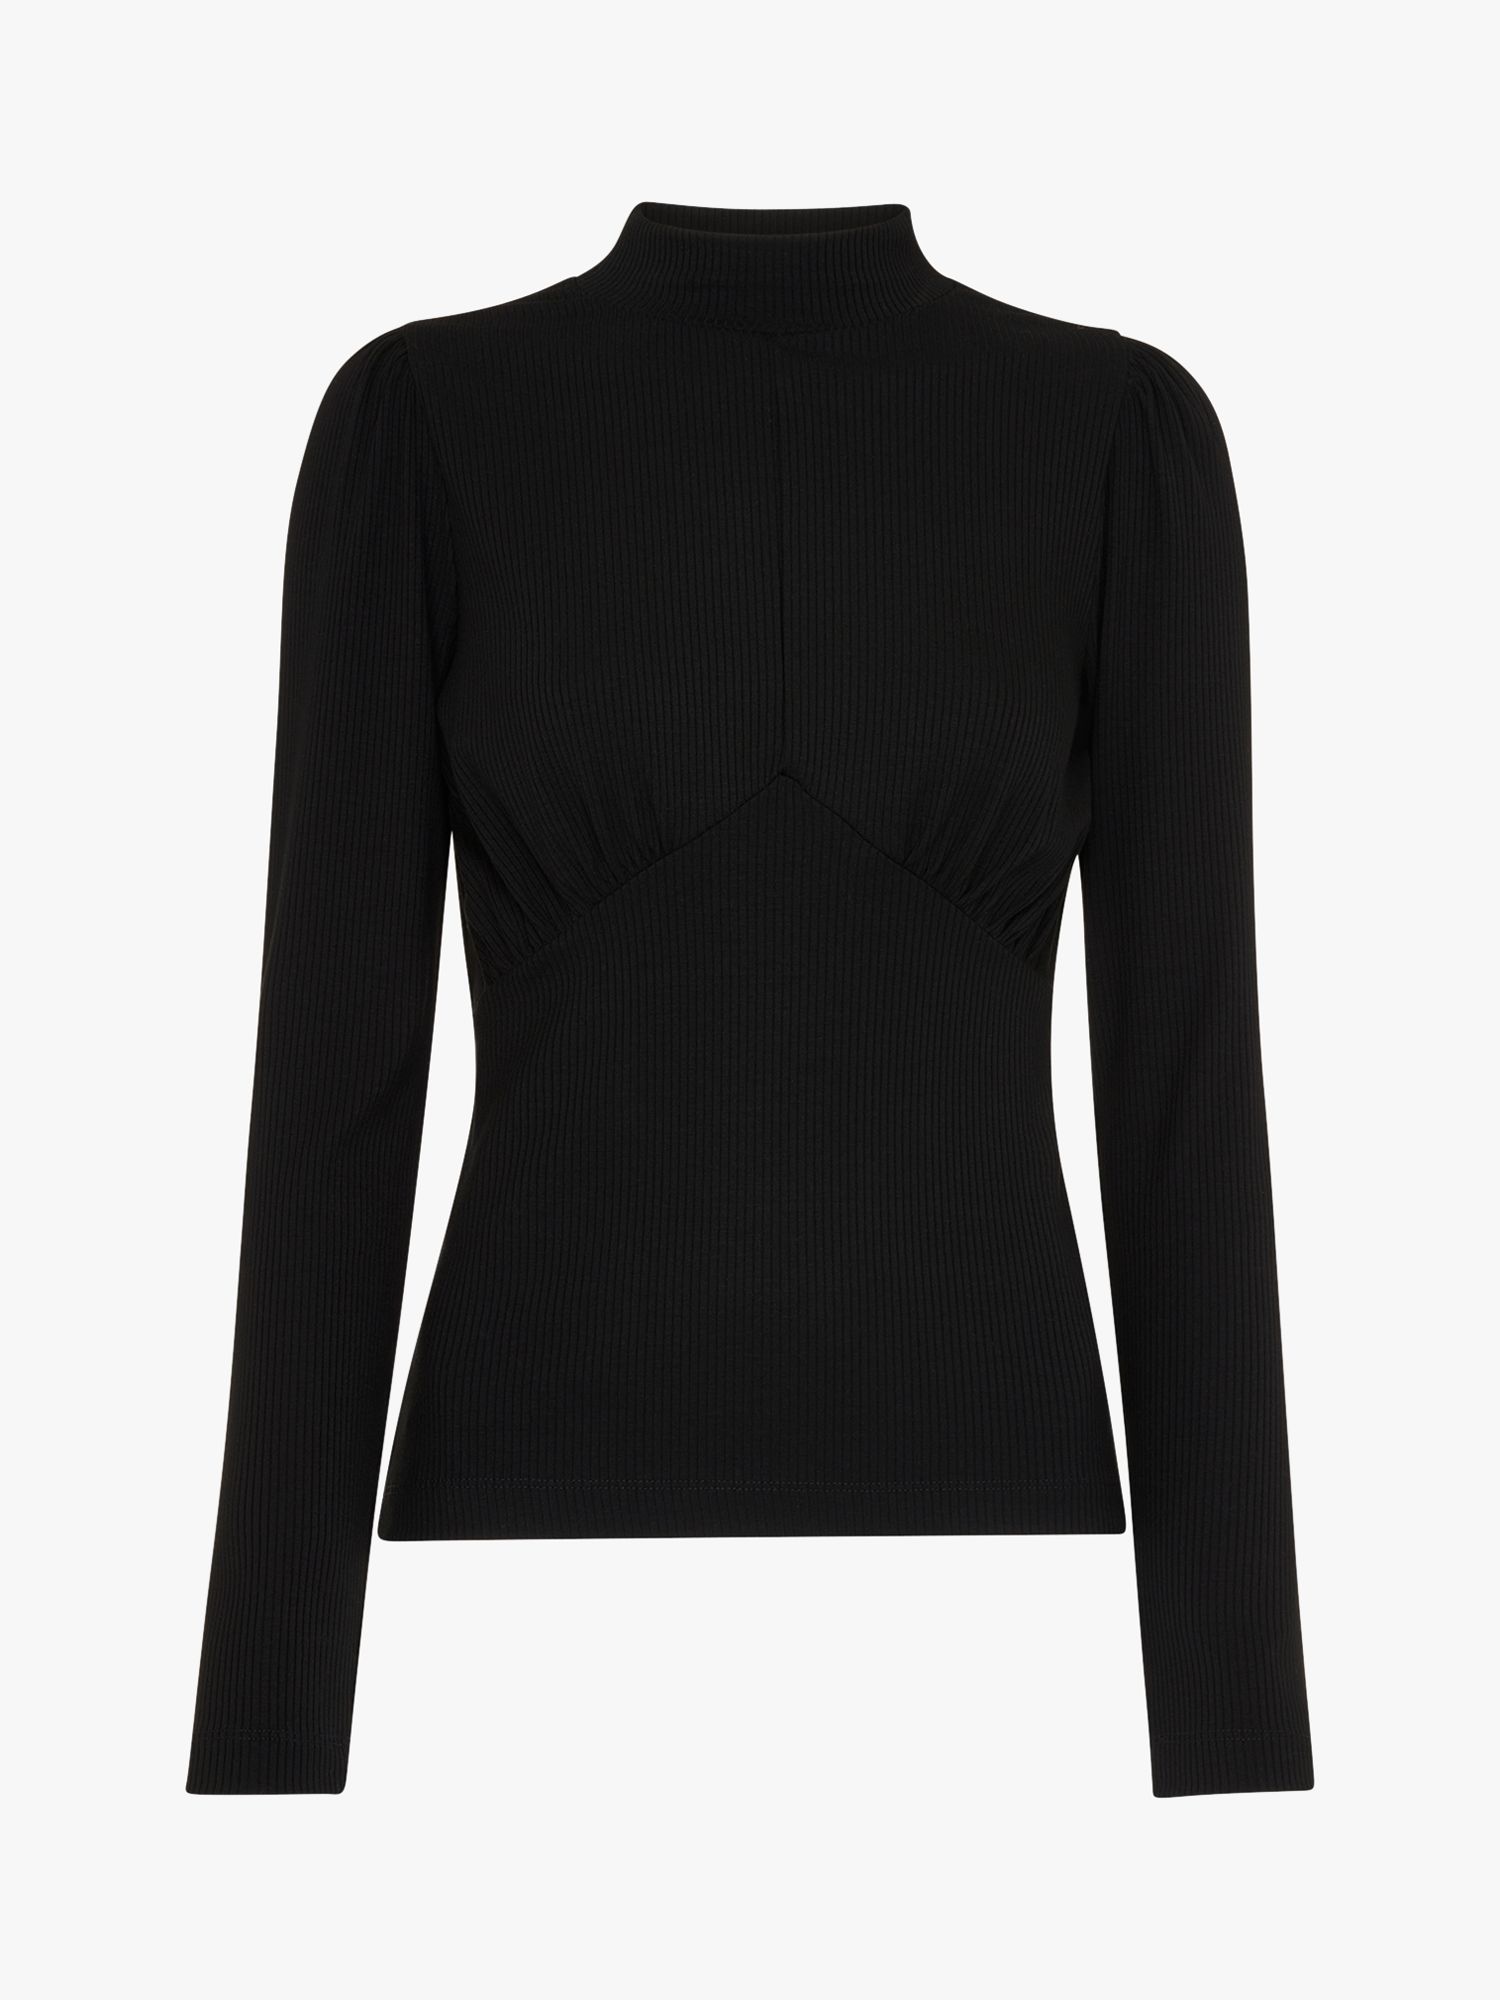 Whistles Gathered Empire Line Top, Black at John Lewis & Partners